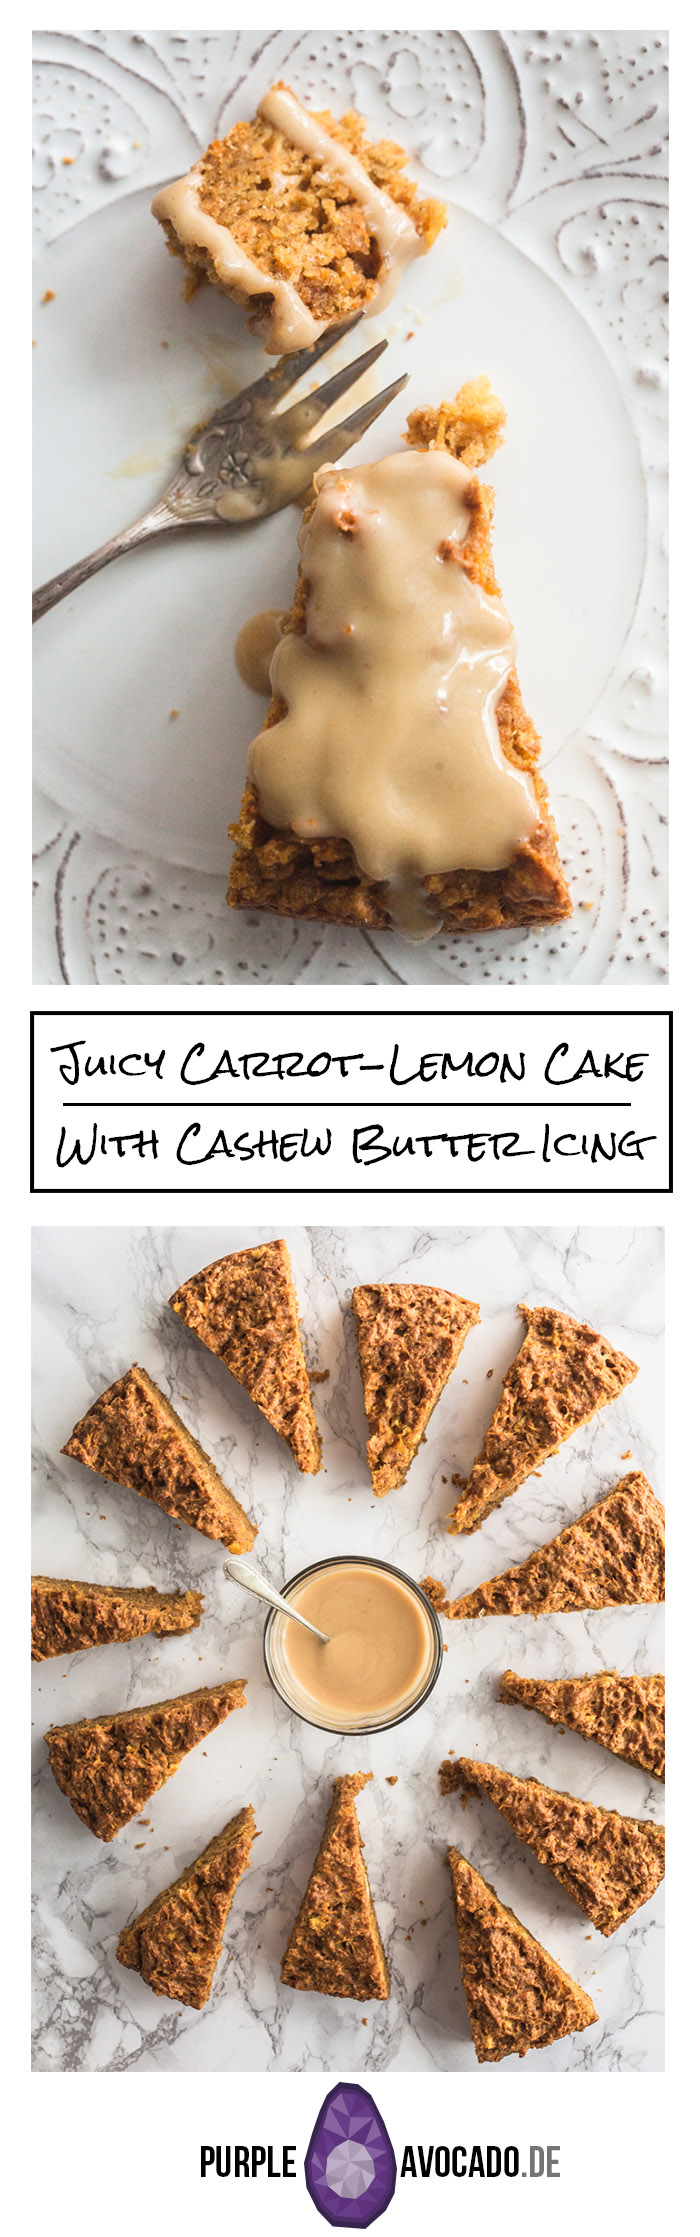 Here's a recipe for a soft and tender vegan Carrot Lemon Cake with Cashew Butter Icing. The juicy carrot cake will stay fresh in the fridge for a couple of days. The slightly bitter, nutty cashew icing gives it a special twist, the fresh lemon juice and lemon zest add a sour and fruity note.